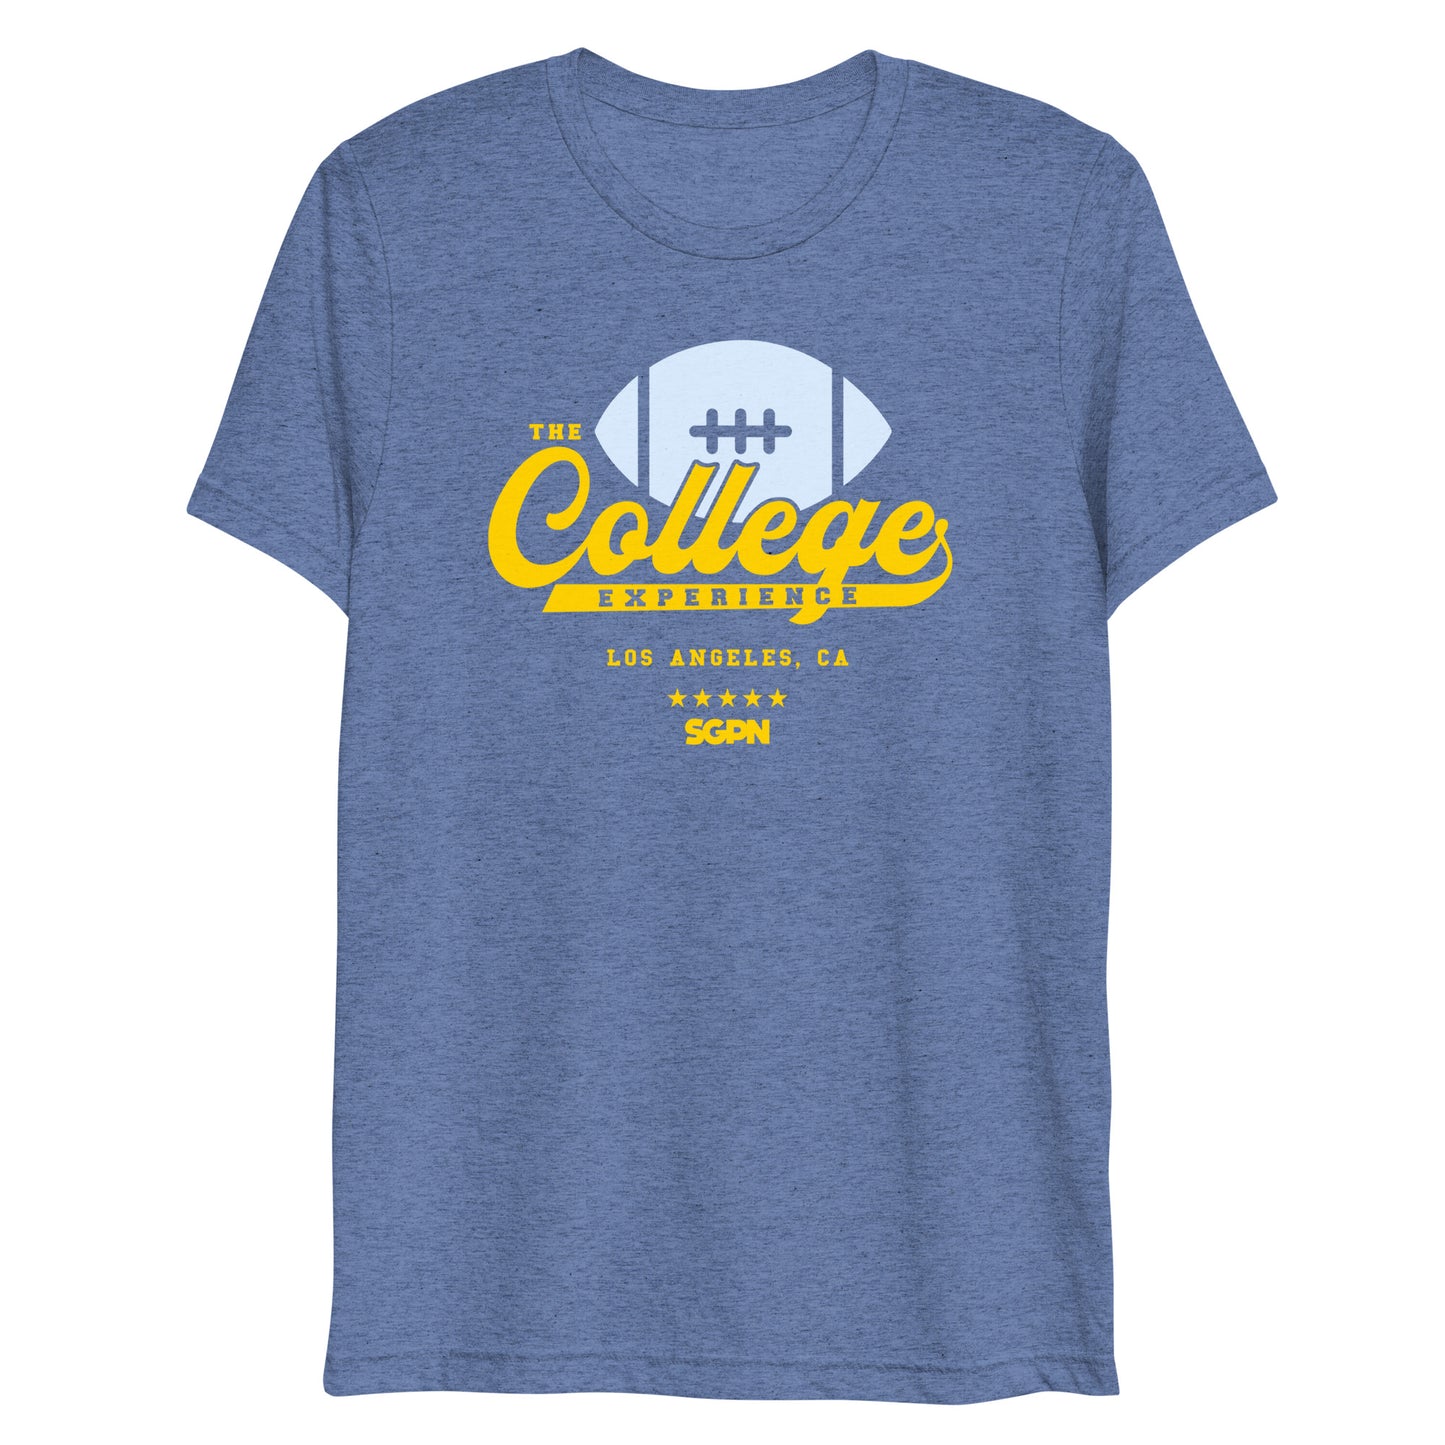 The College Football Experience - Los Angeles edition - Blue Short sleeve t-shirt